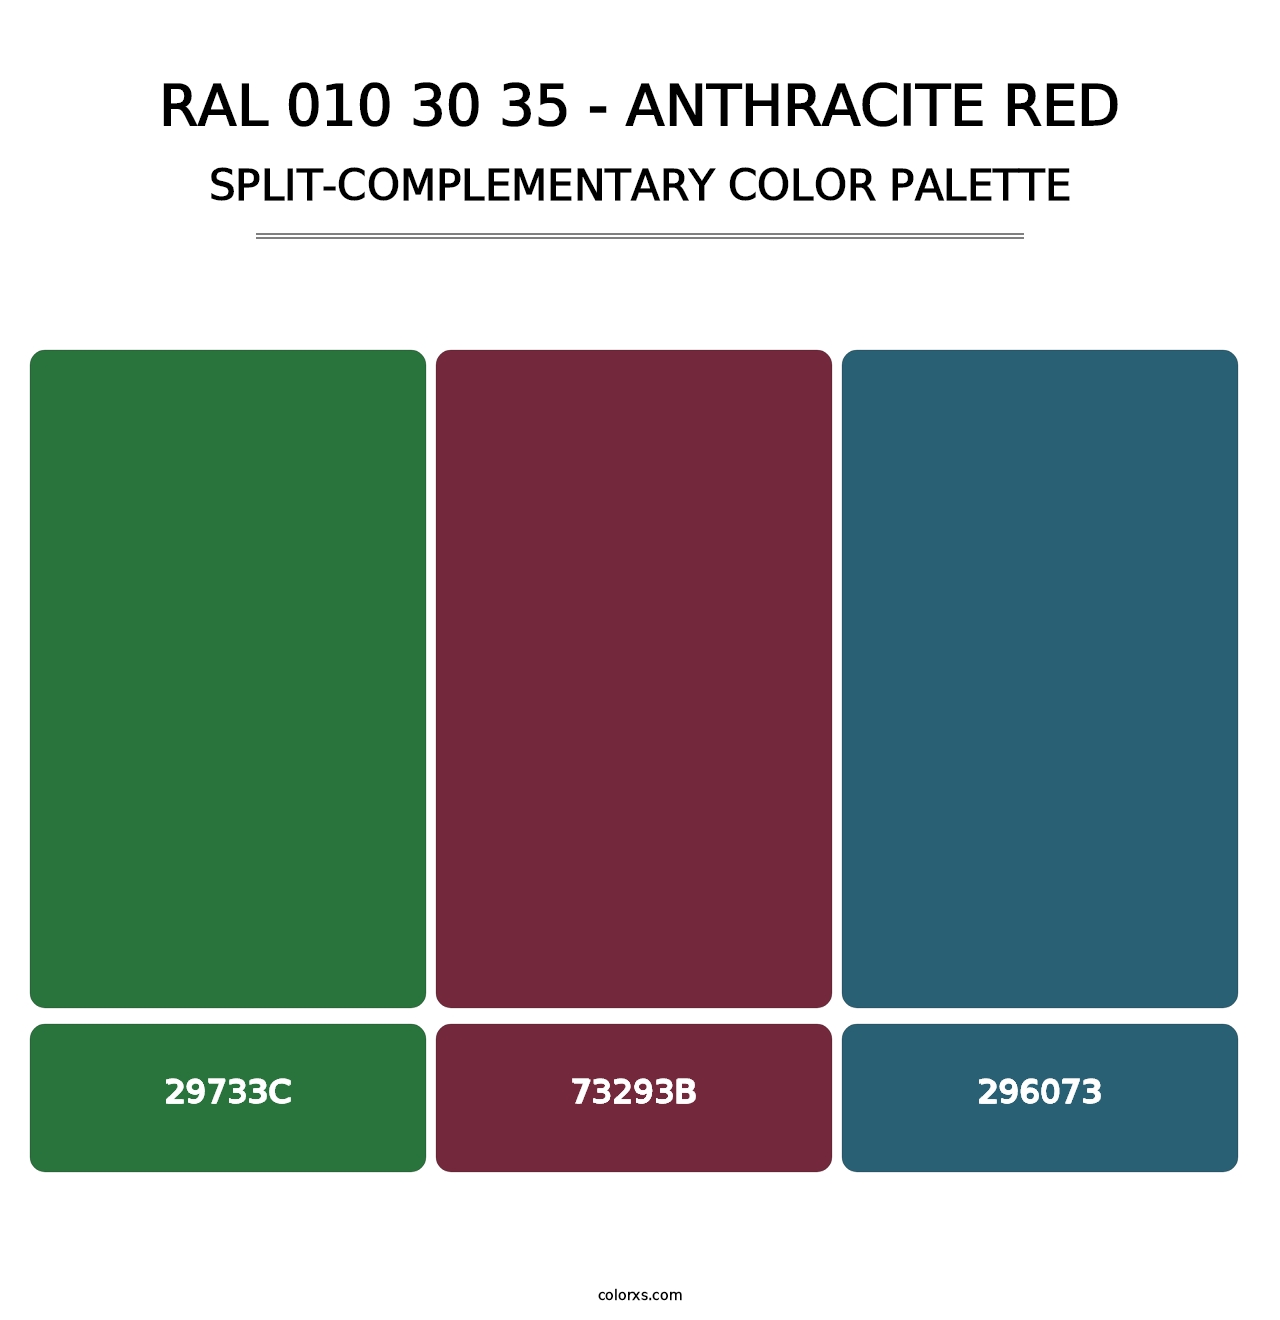 RAL 010 30 35 - Anthracite Red - Split-Complementary Color Palette